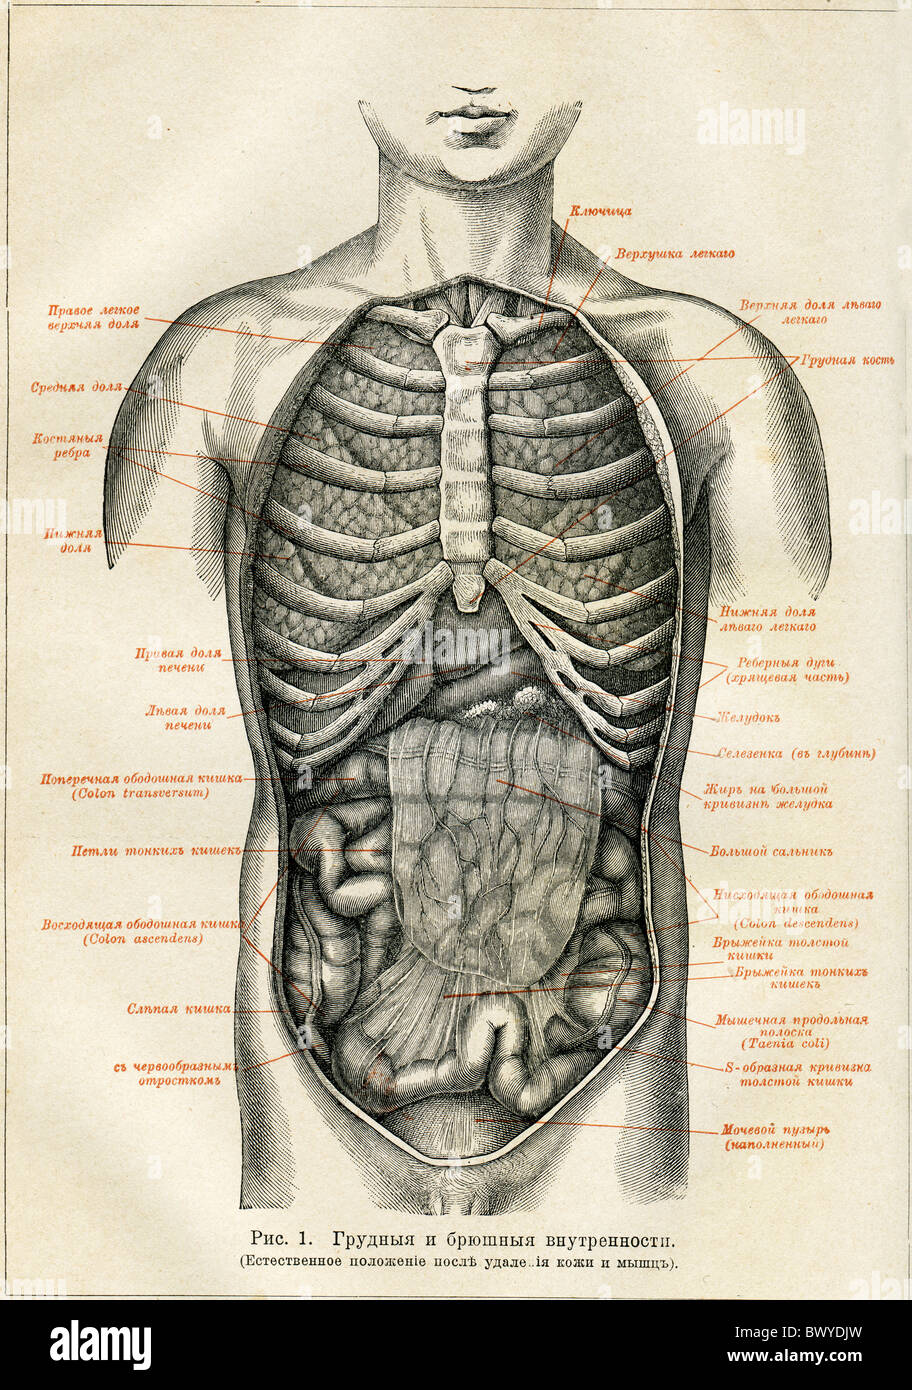 Internal organs of a human - an illustration of the encyclopedia publishers Education, St. Petersburg, Russian Empire, 1896 Stock Photo